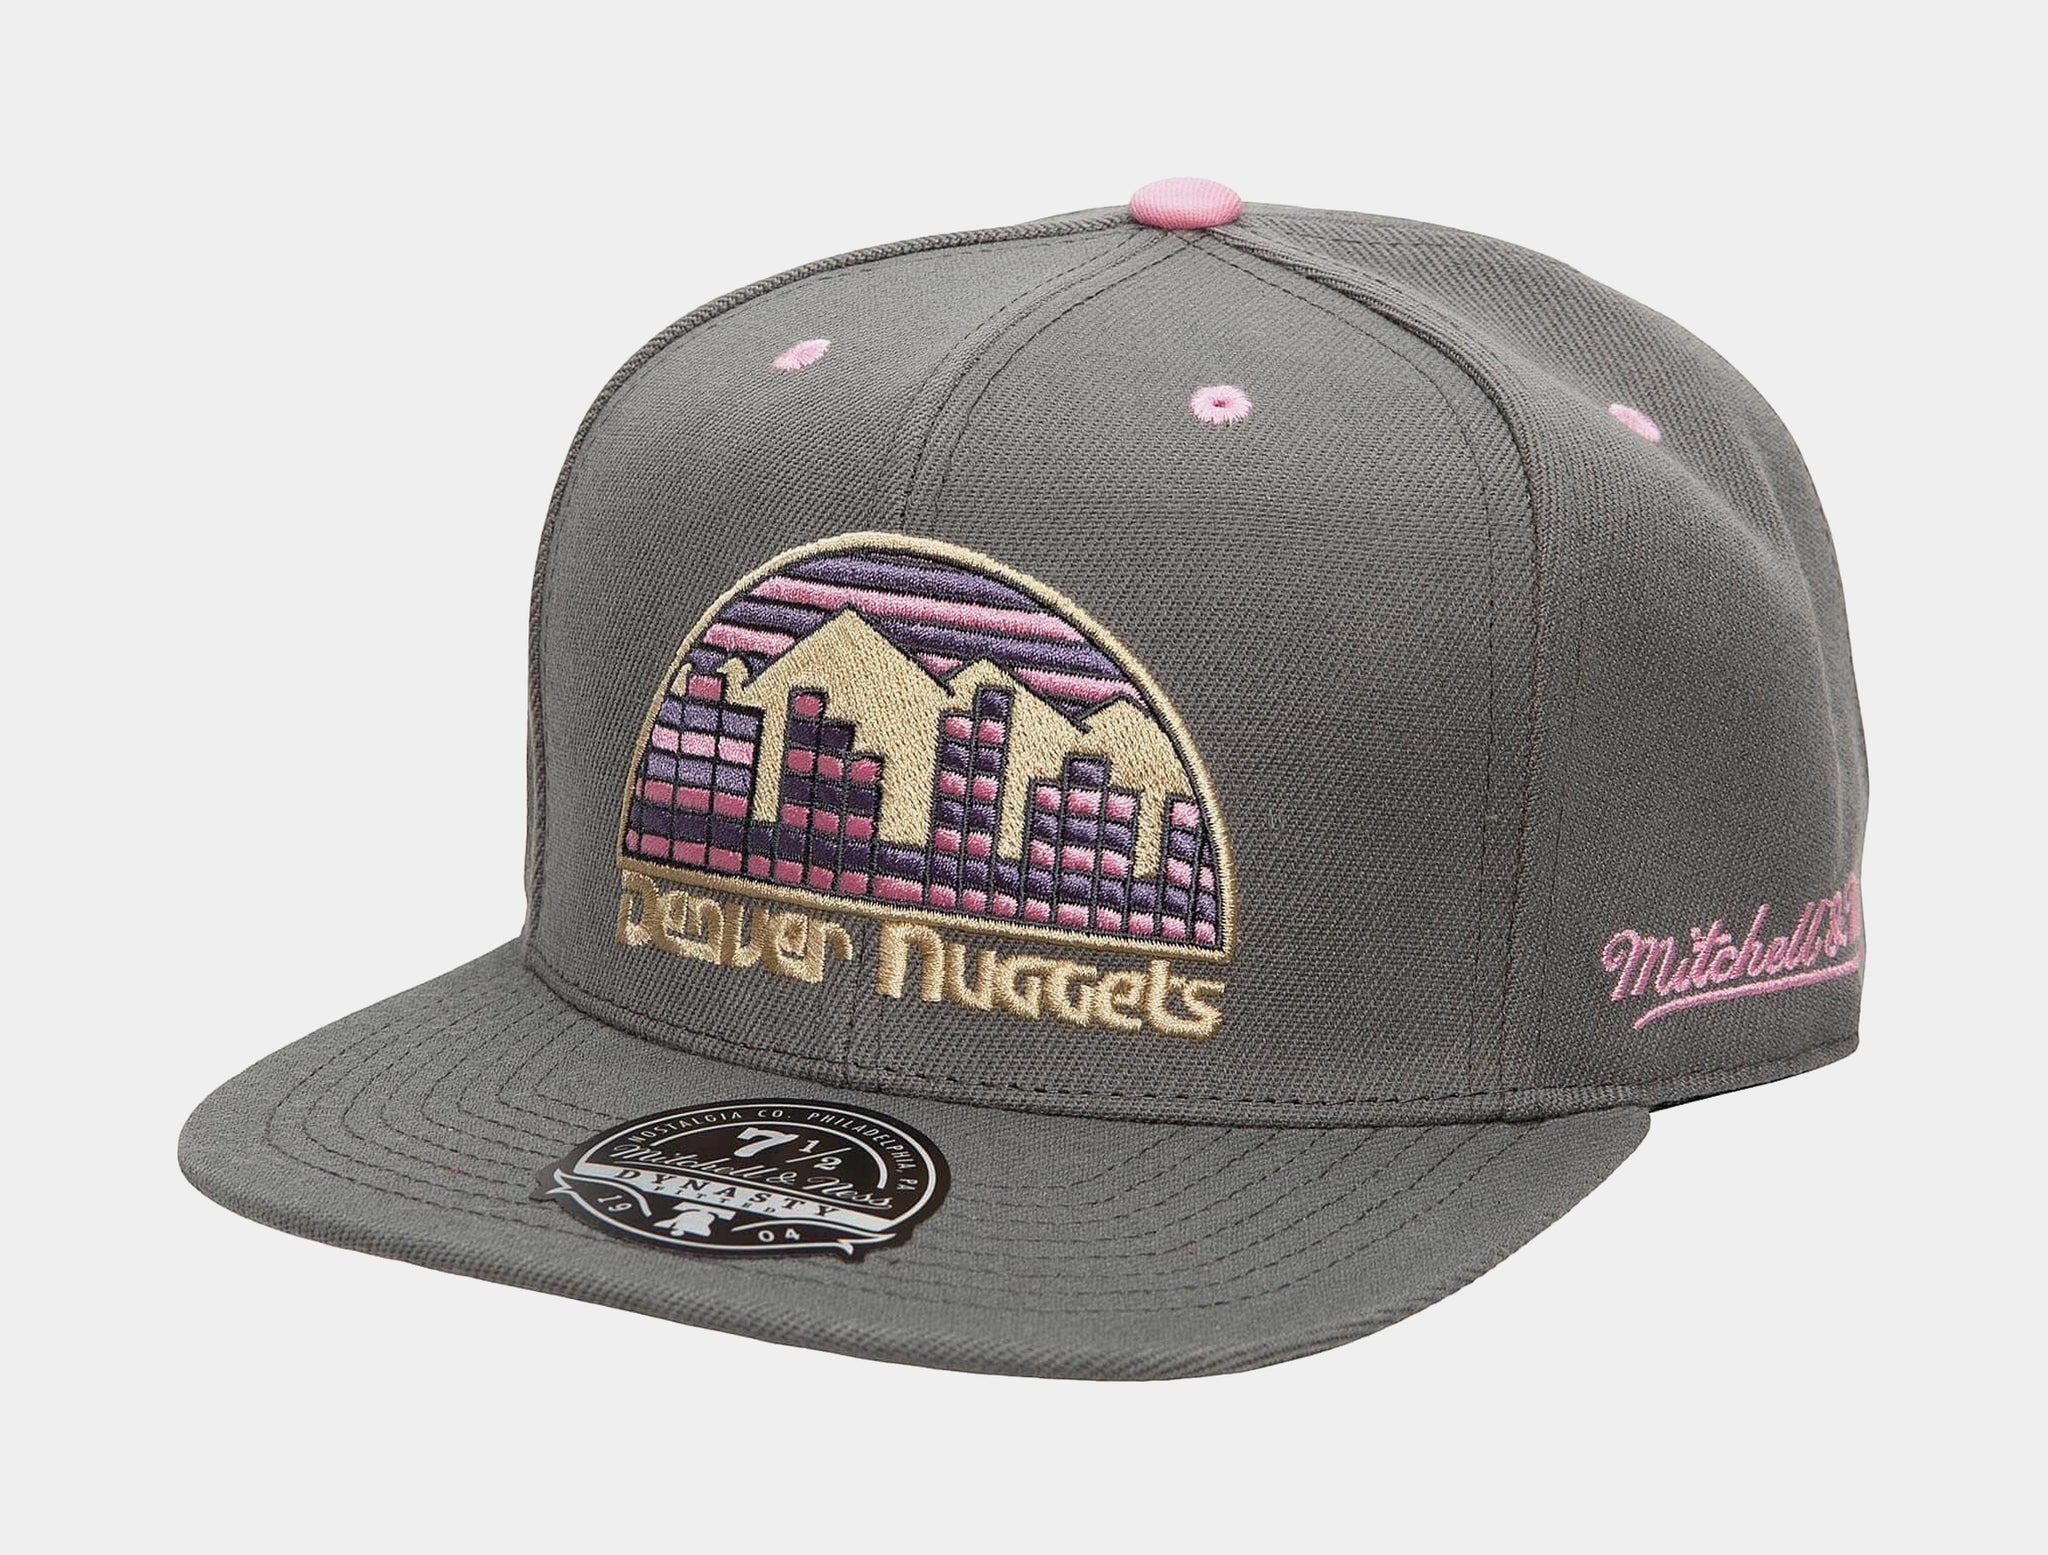  Mitchell & Ness Denver Nuggets Fitted Size 7 1/2 Full